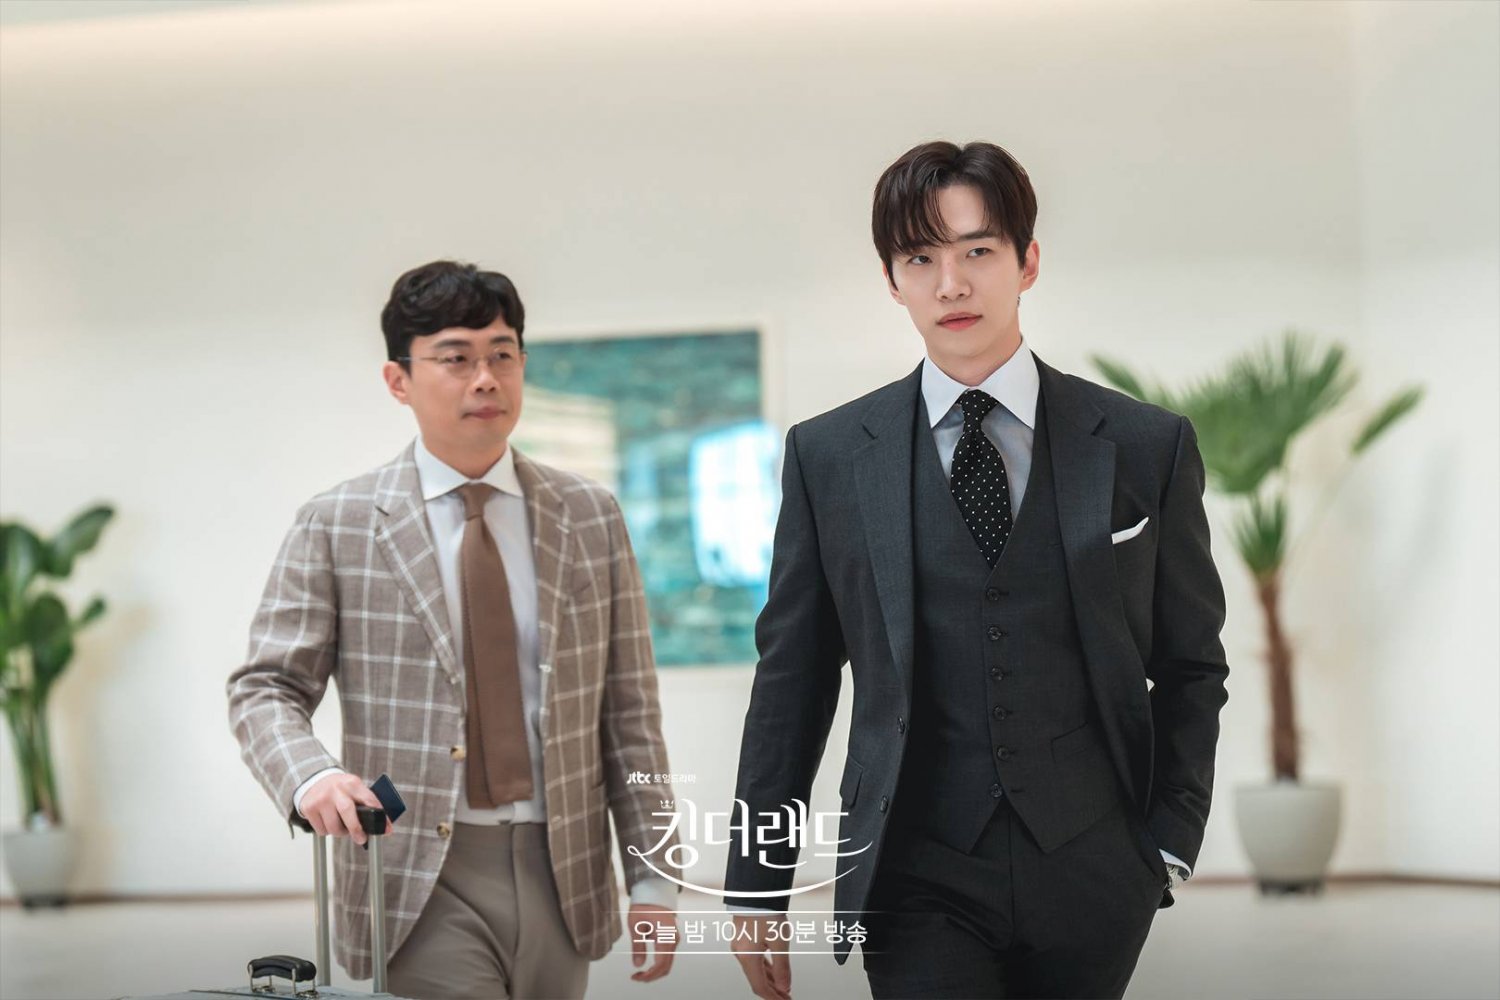 [Photos] New Stills Added for the Upcoming Korean Drama 'King the Land ...